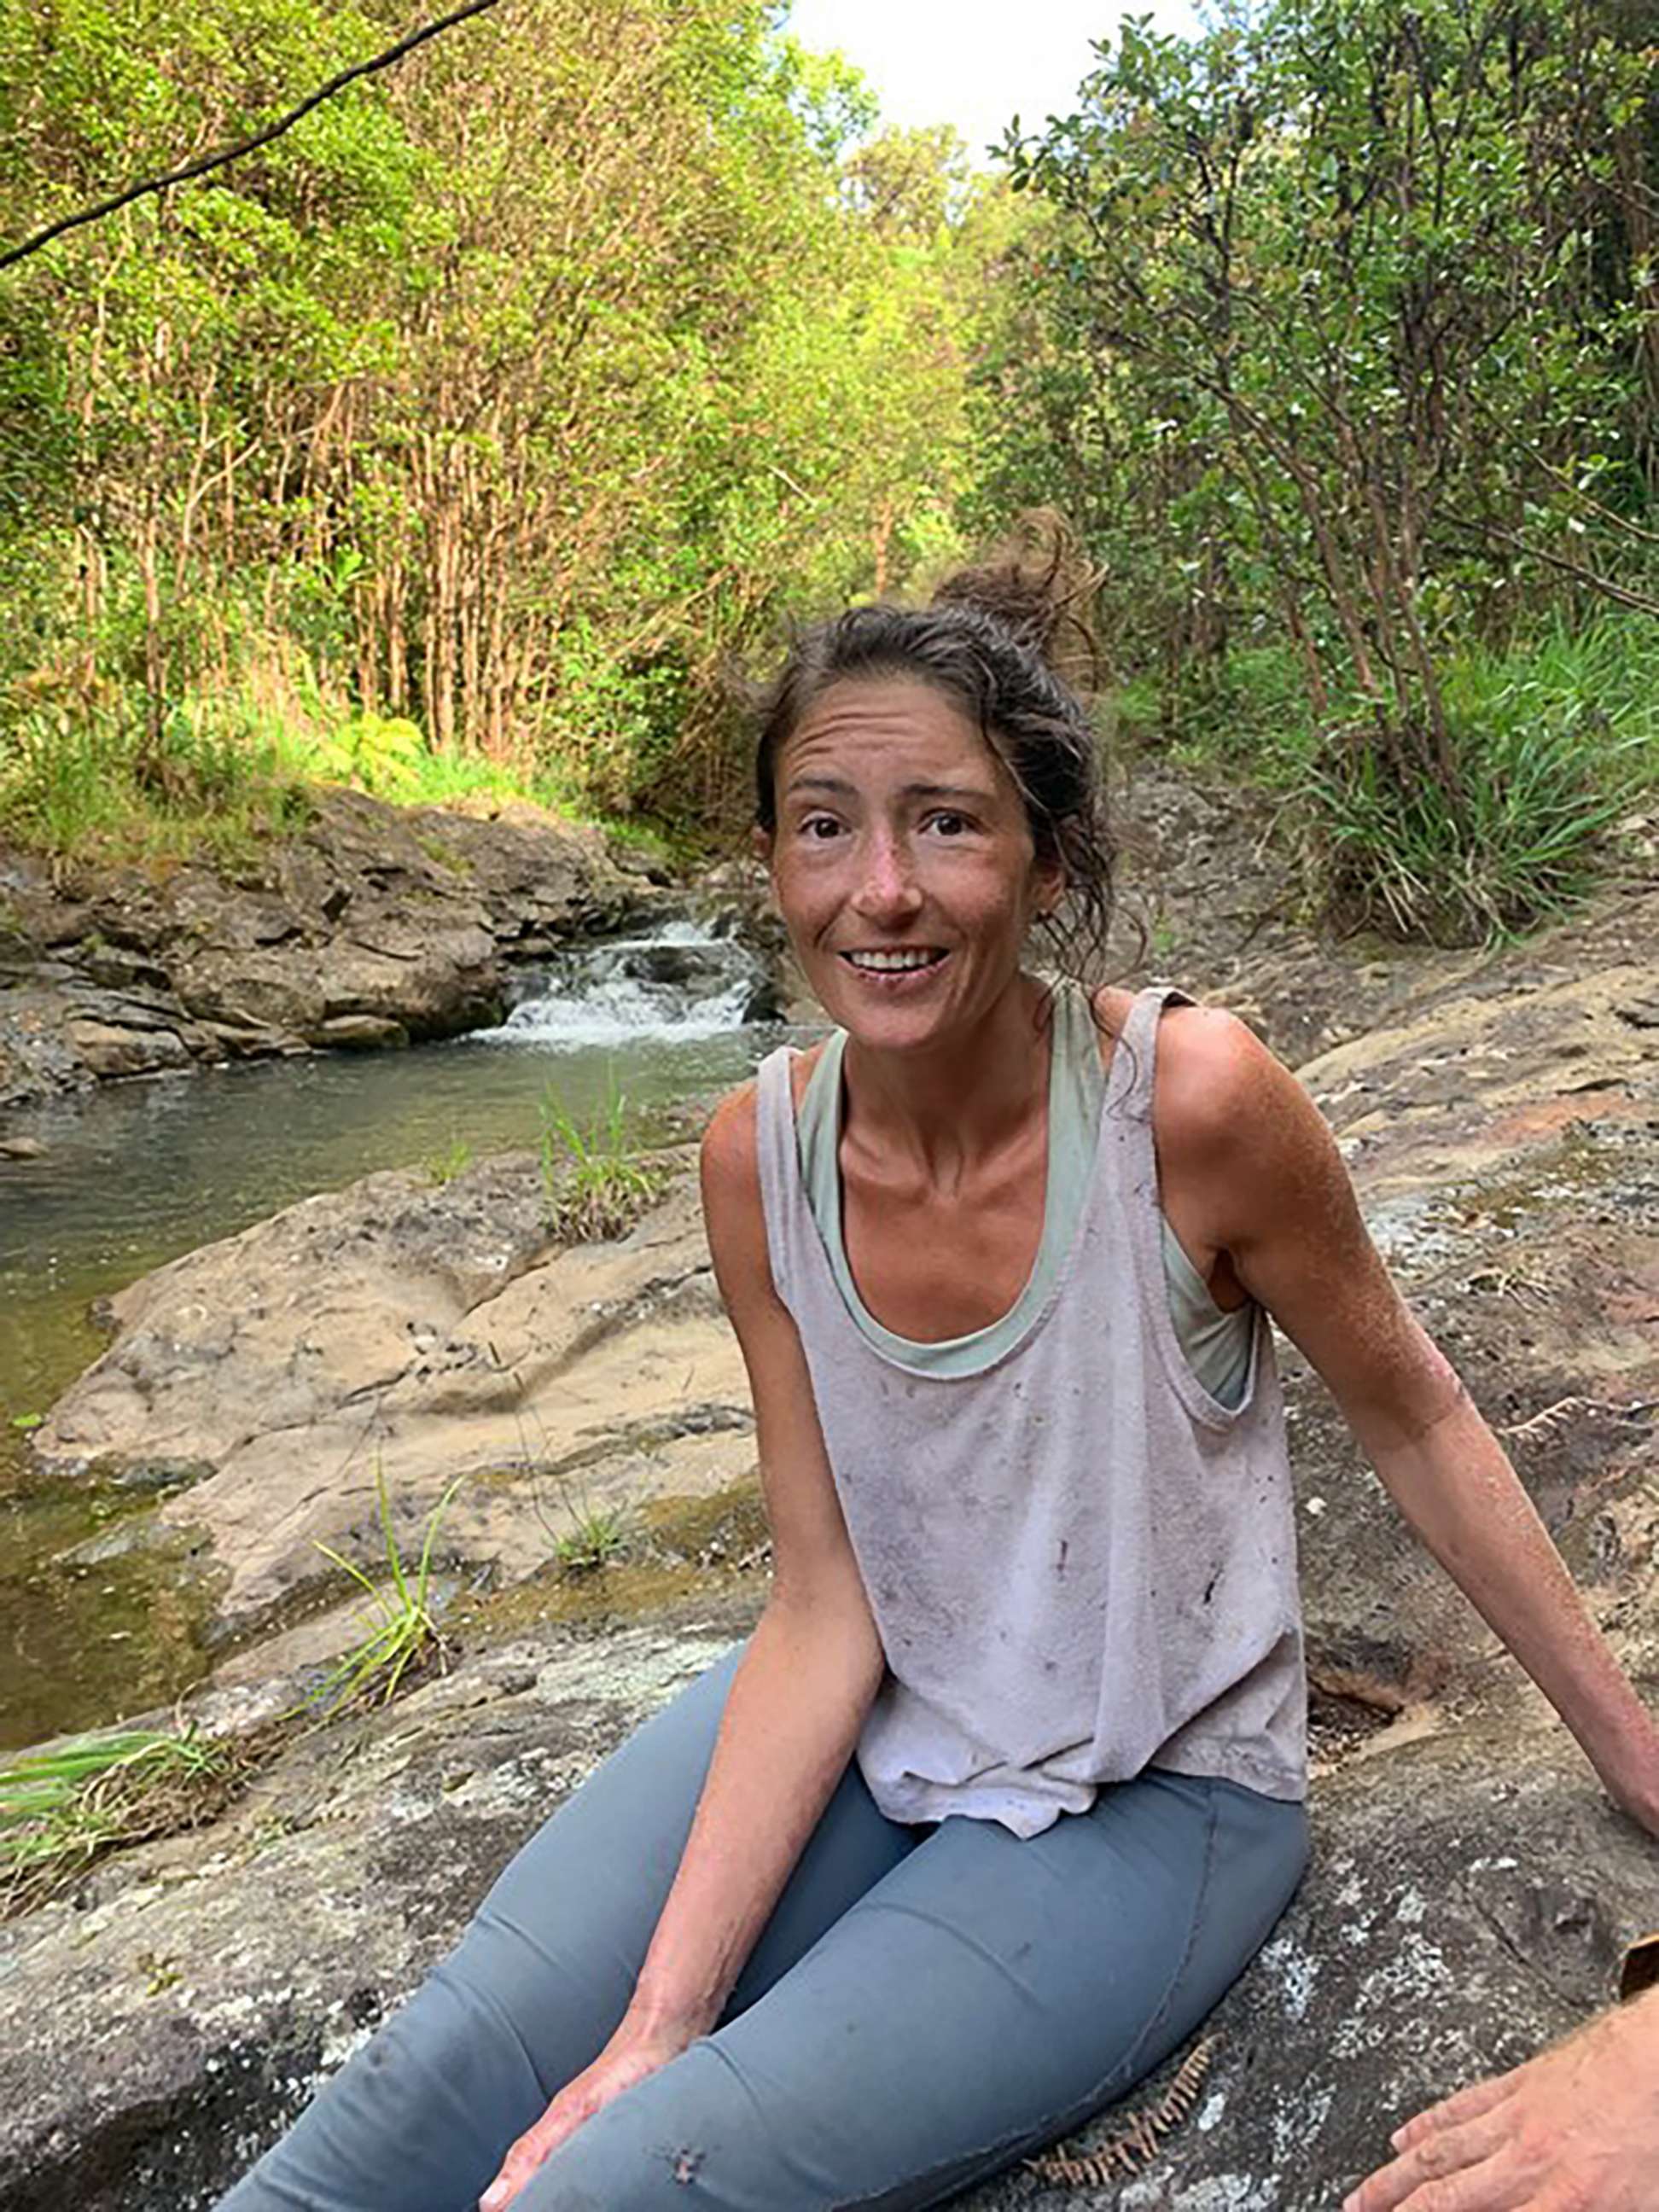 PHOTO:  Hiker Amanda Eller was found after missing for 17 days, May 24, 2019, at Makawao Forest Reserve on the Hawaiian Island of Maui.